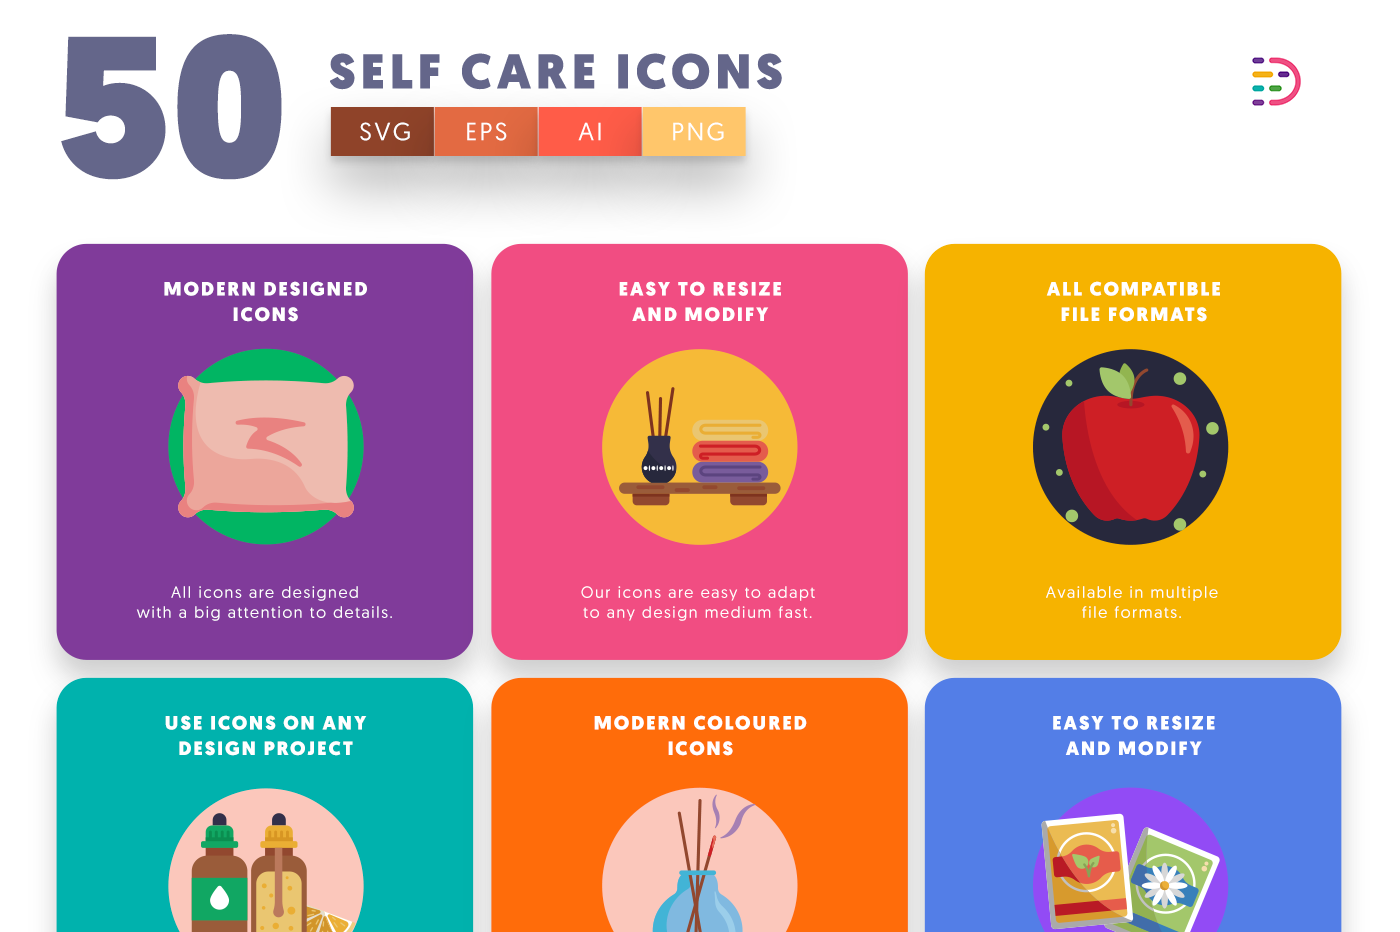 50-Self Care-Icons